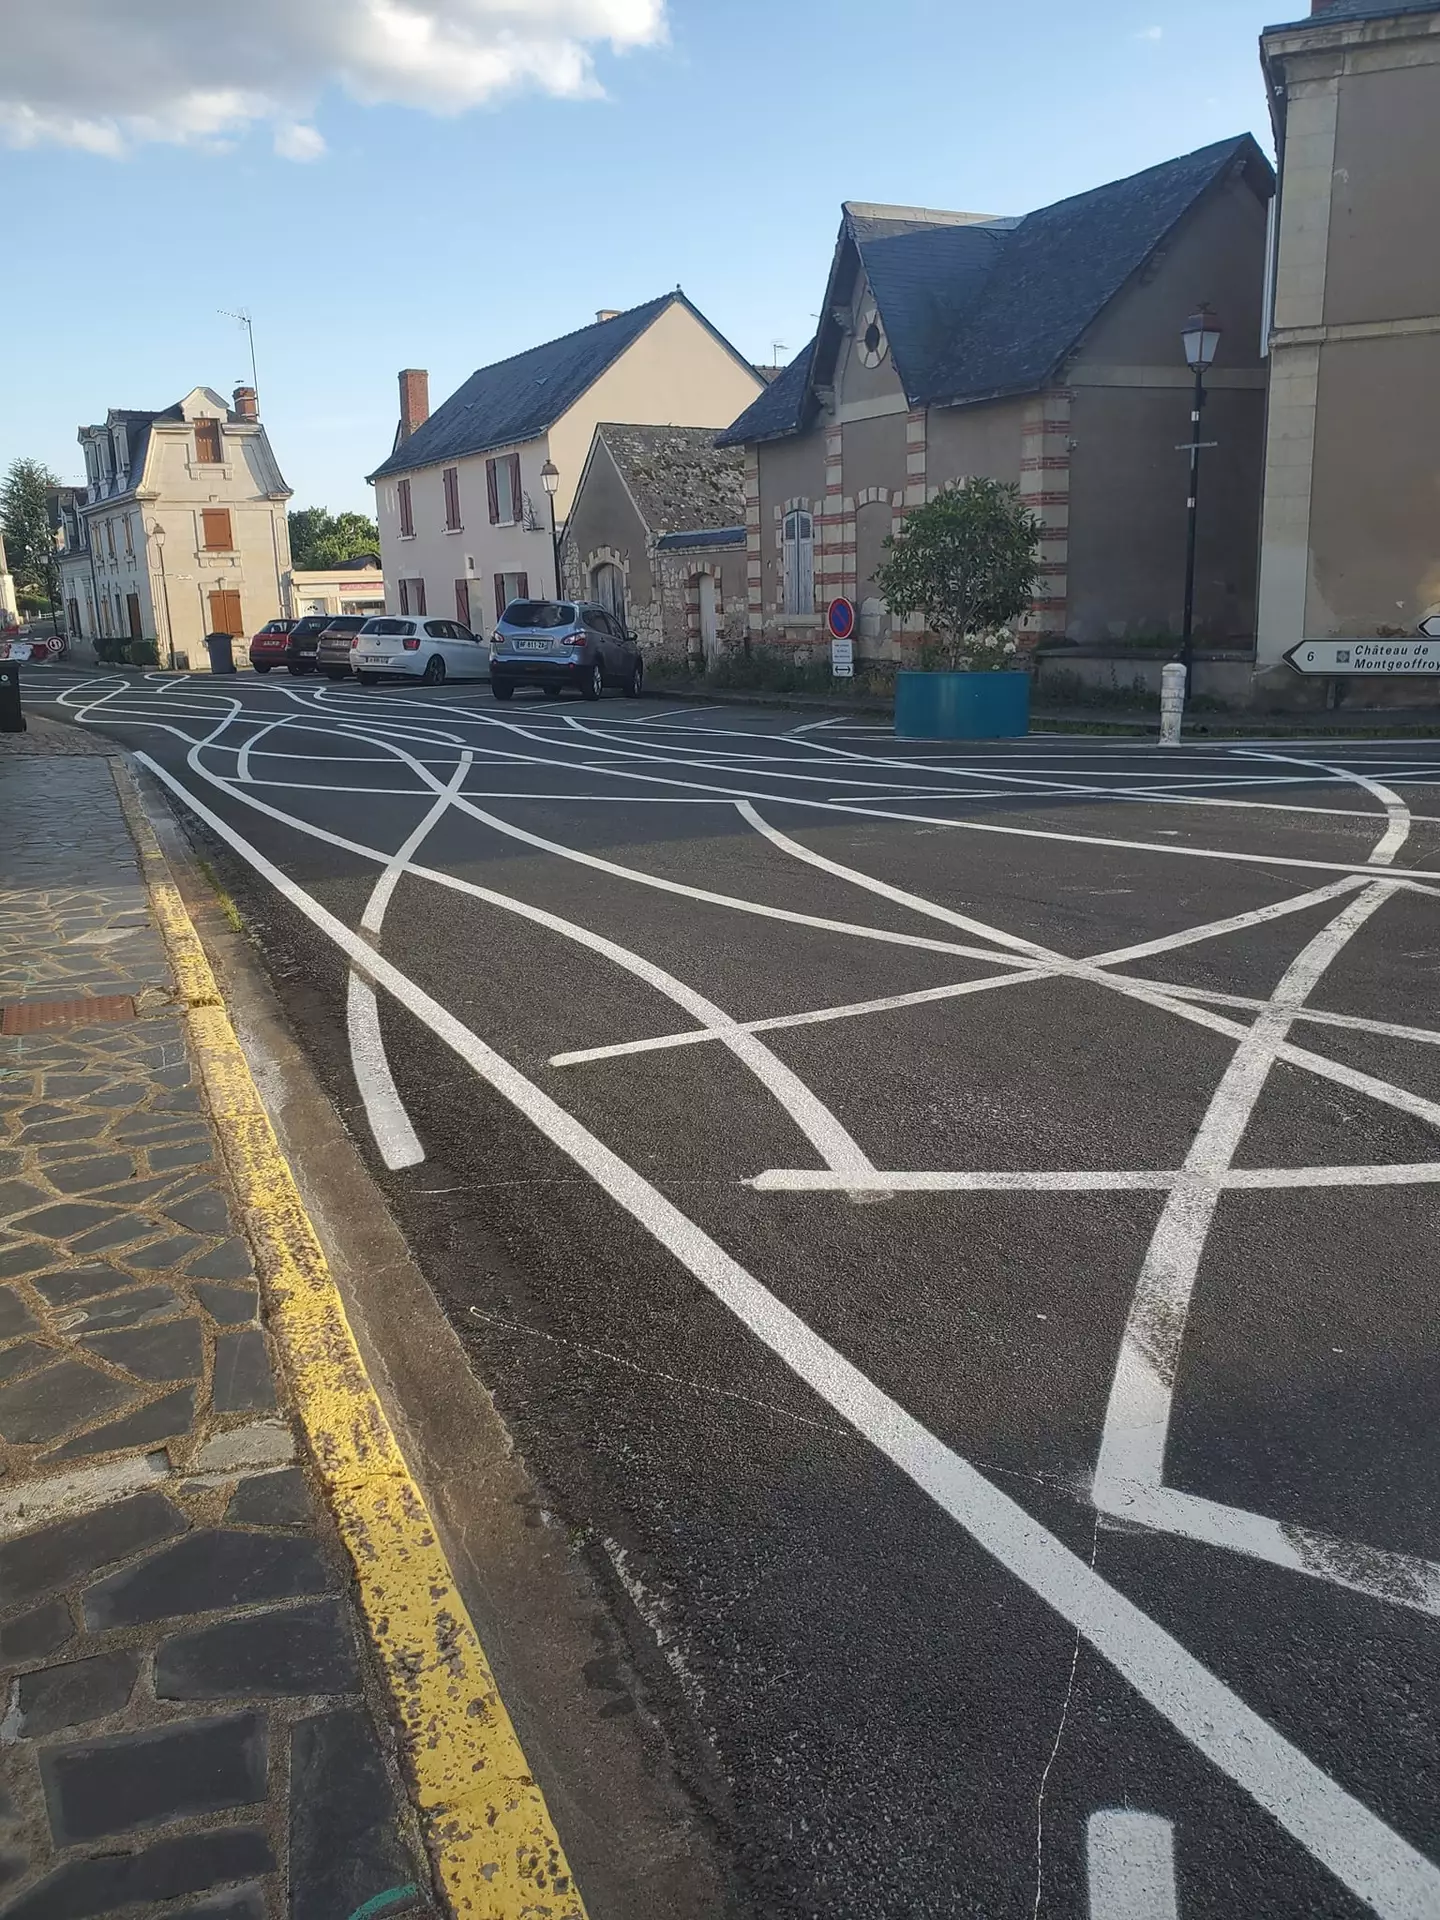 The French village has painted bizarre lines in a bid to slow traffic.